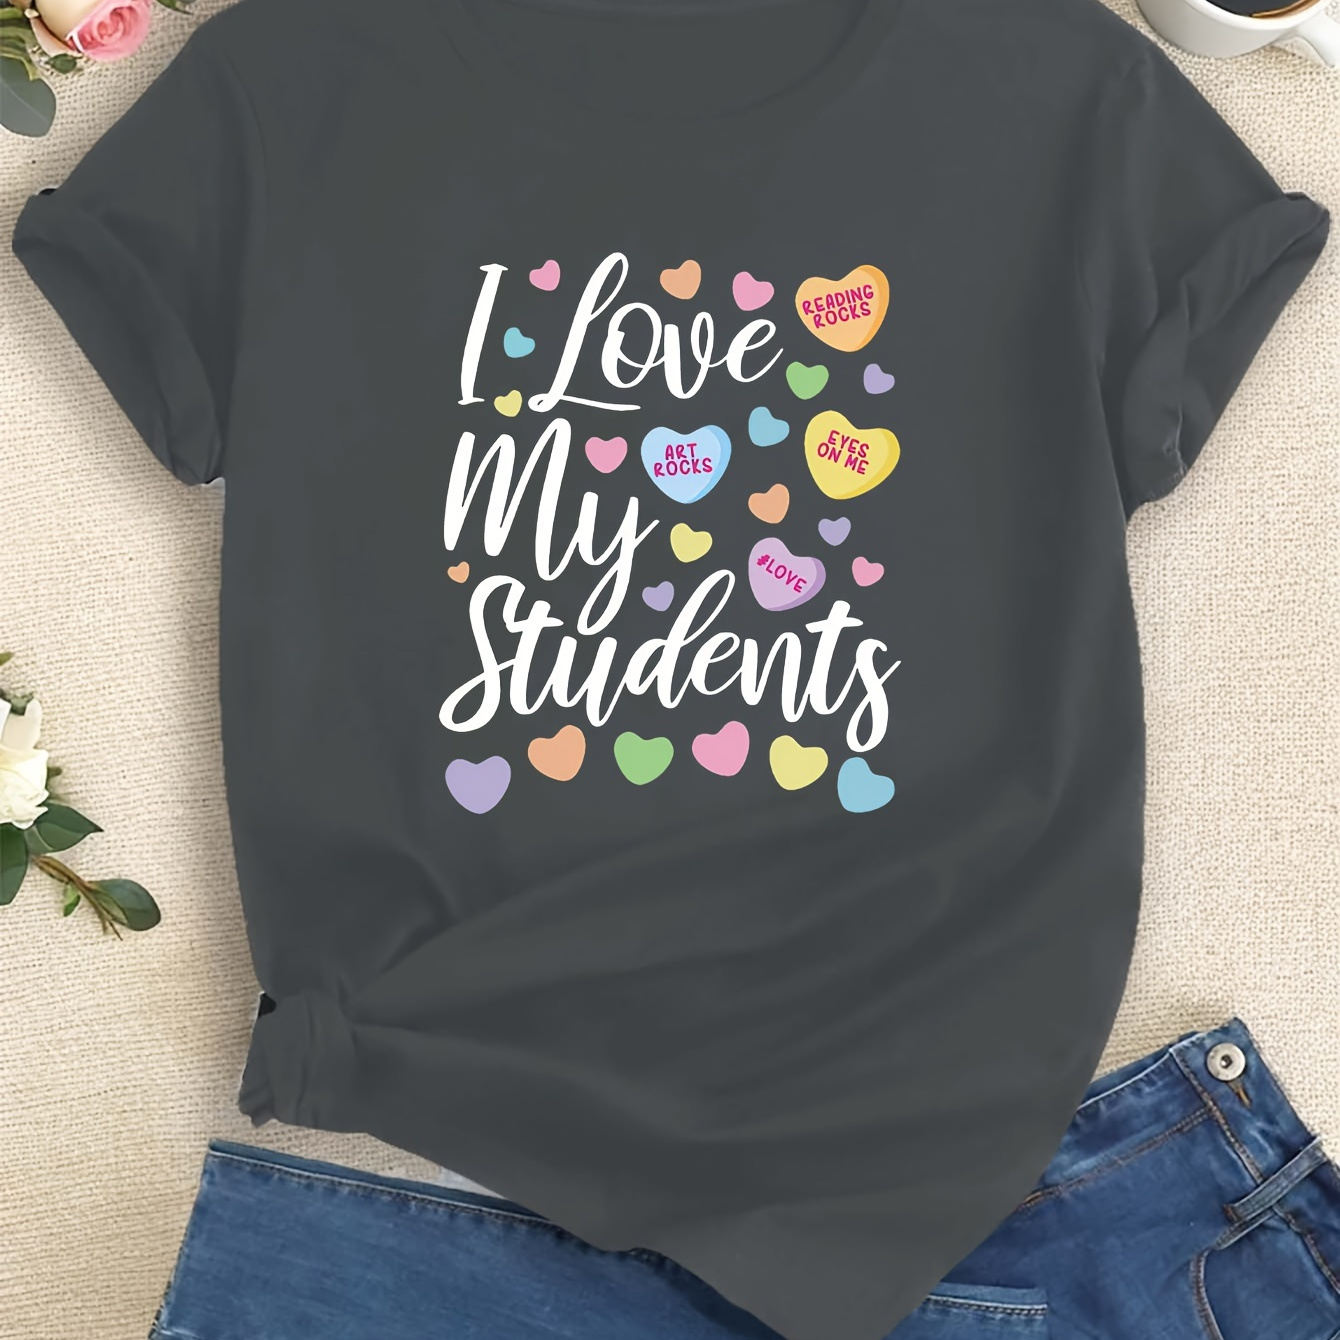 

I Love My Students Print T-shirt, Short Sleeve Crew Neck Casual Top For Summer & Spring, Women's Clothing